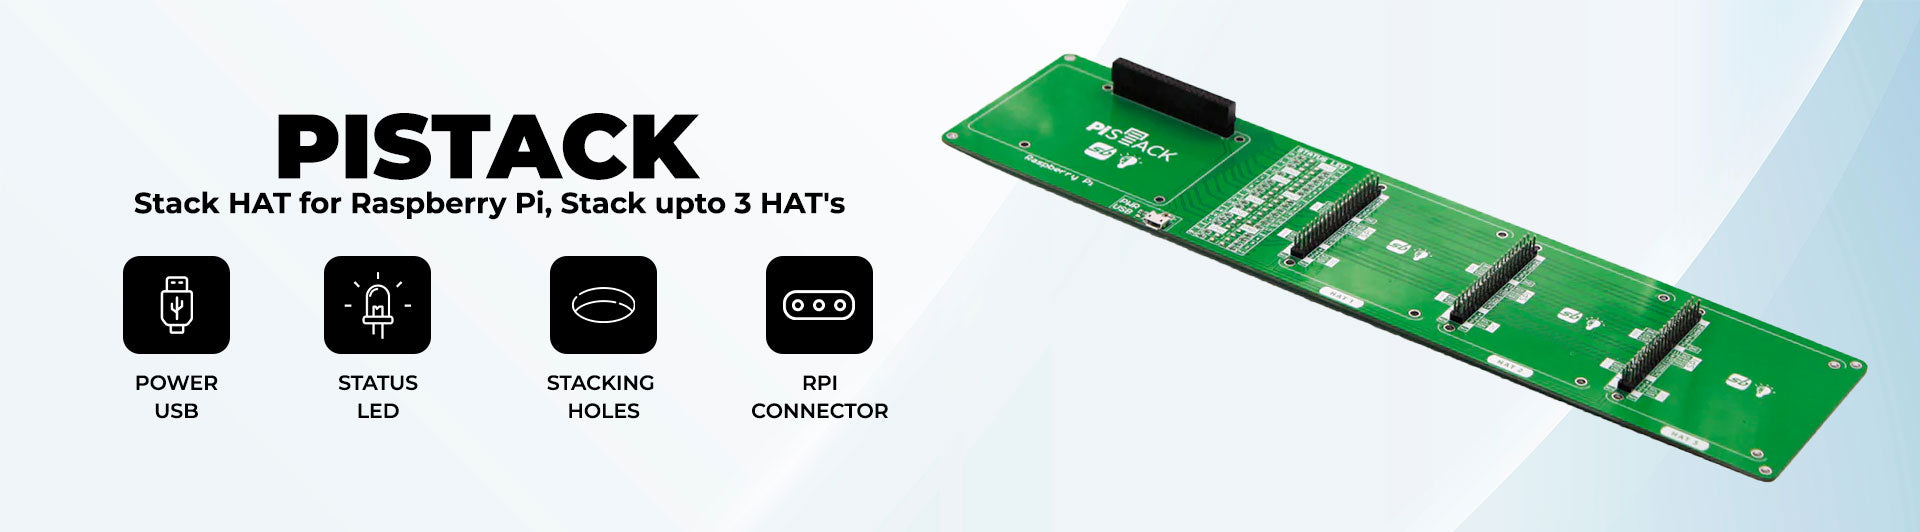 PiStack - Stack HAT for Raspberry Pi, Stack upto 3 HAT's